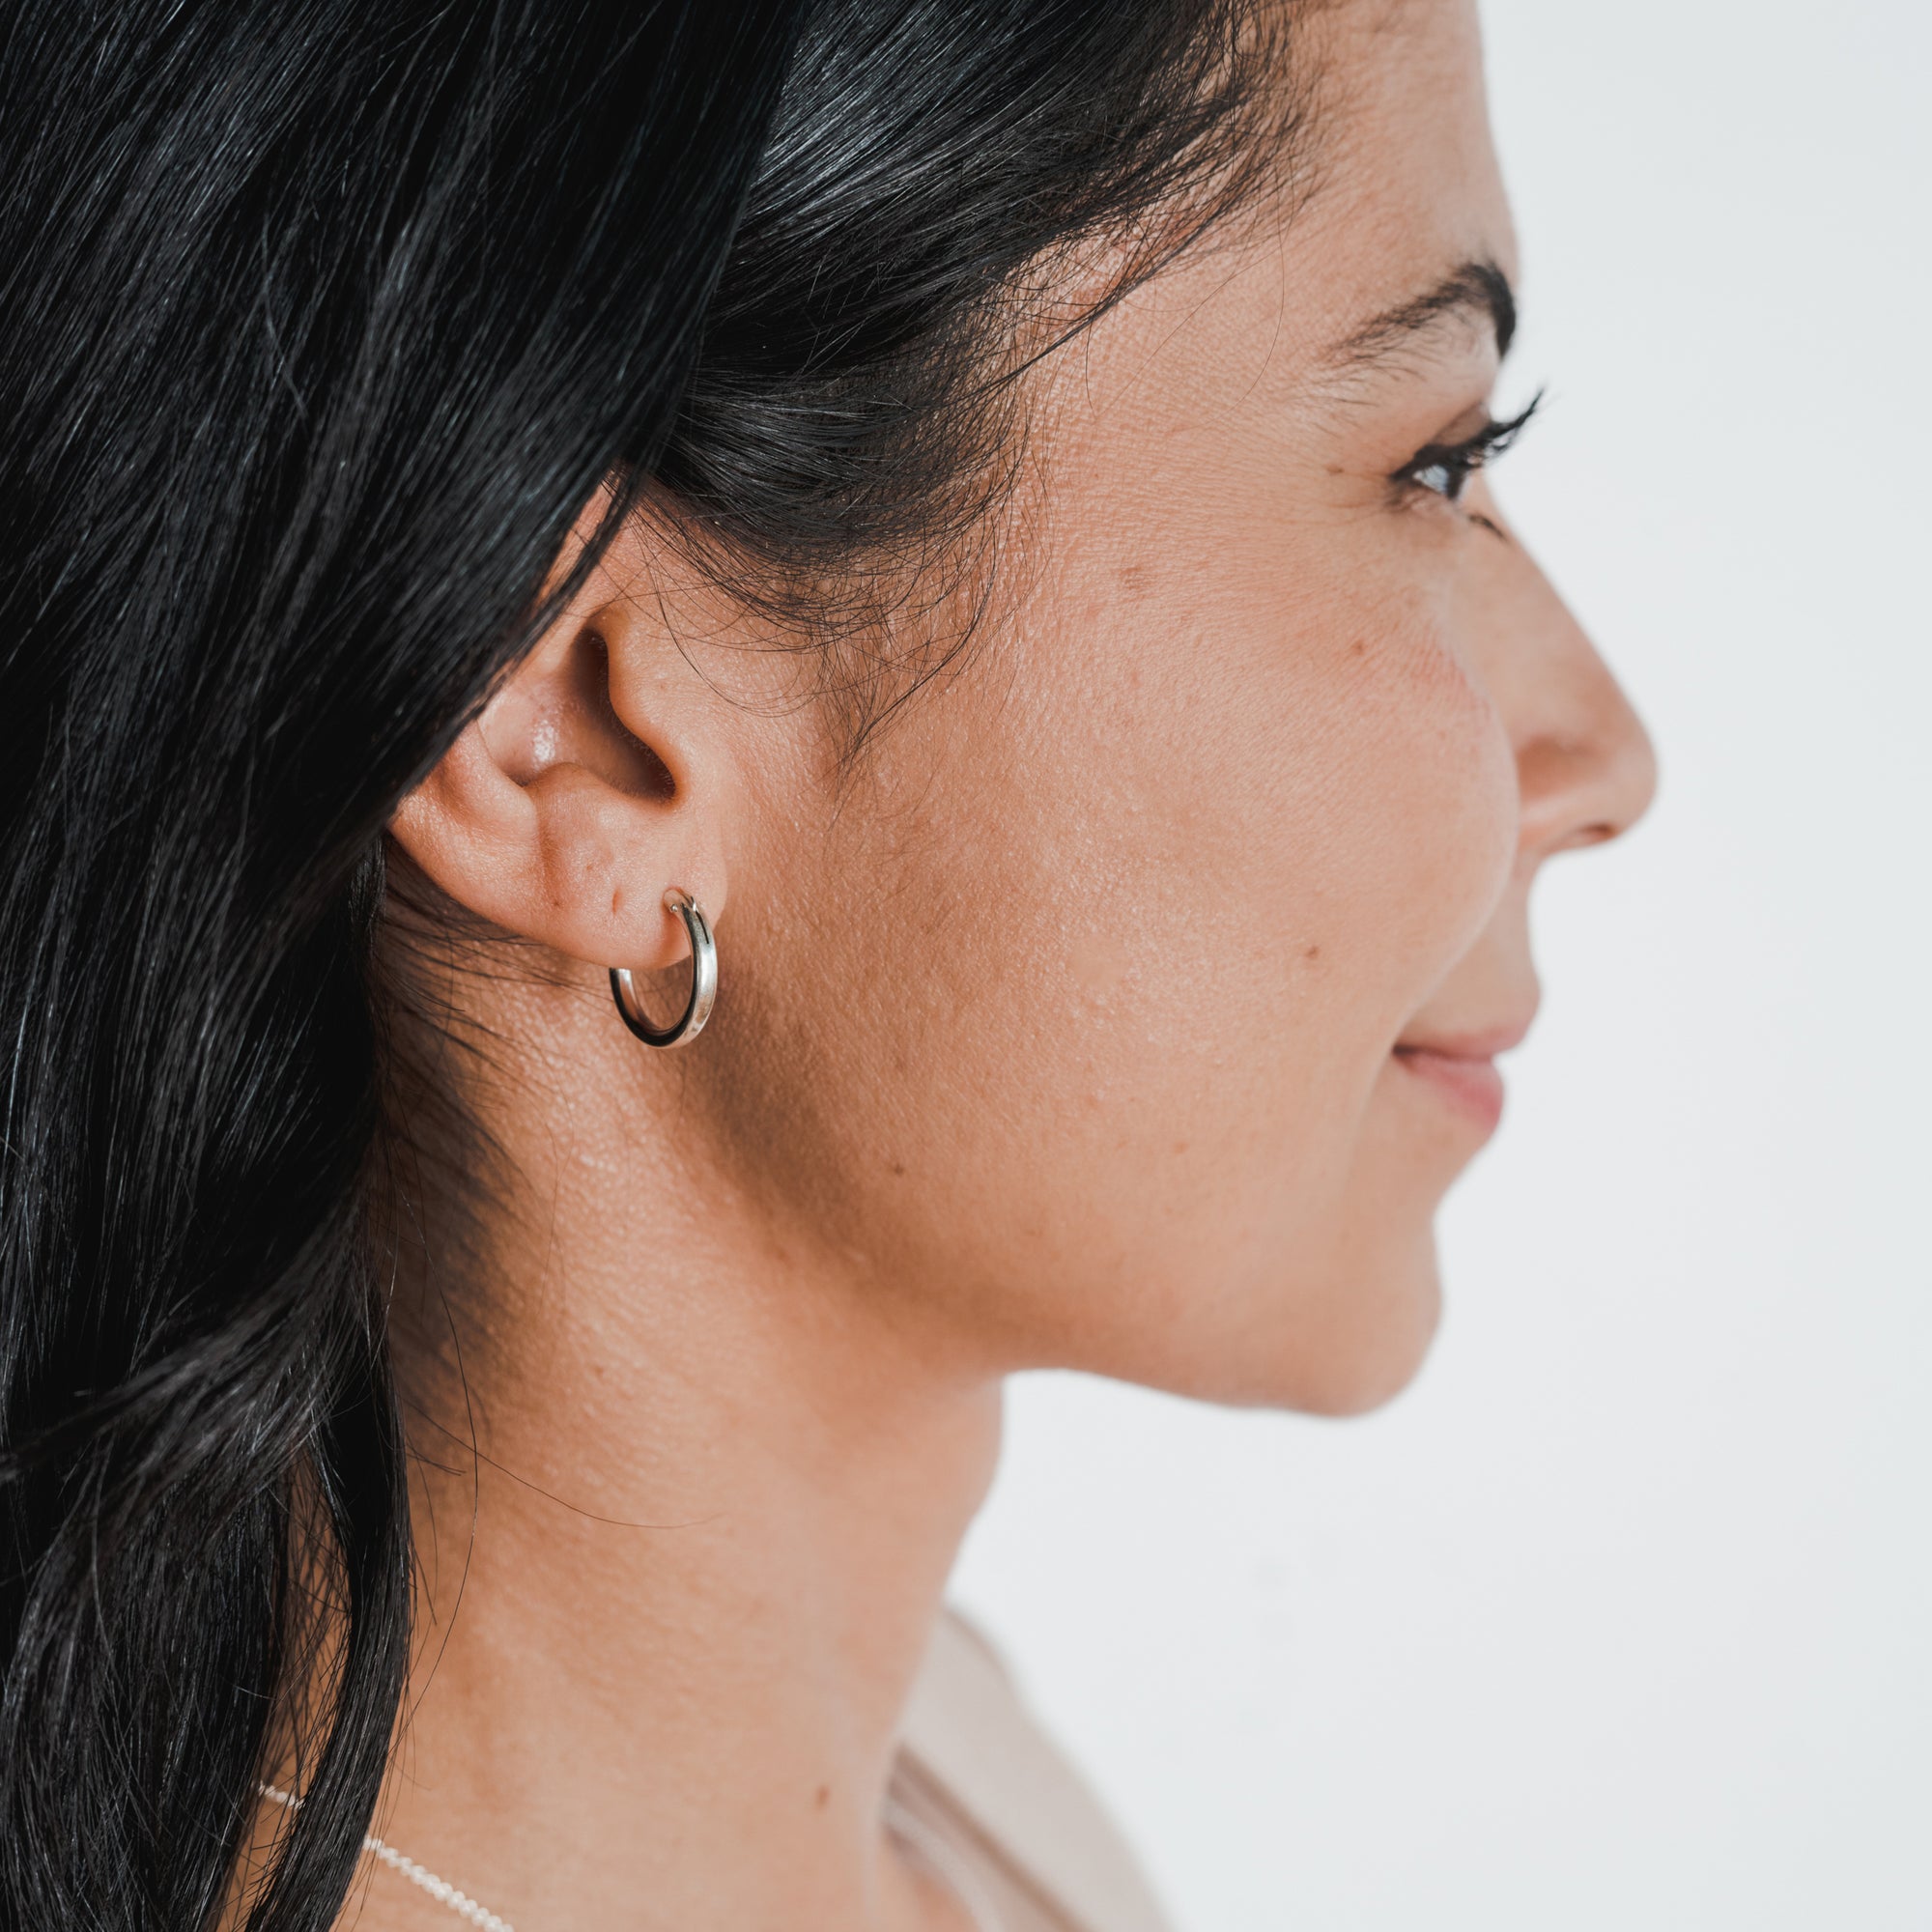 Profile of a woman with dark hair and Becoming Jewelry Everyday Hoop Earrings, medium gold filled against a white background.